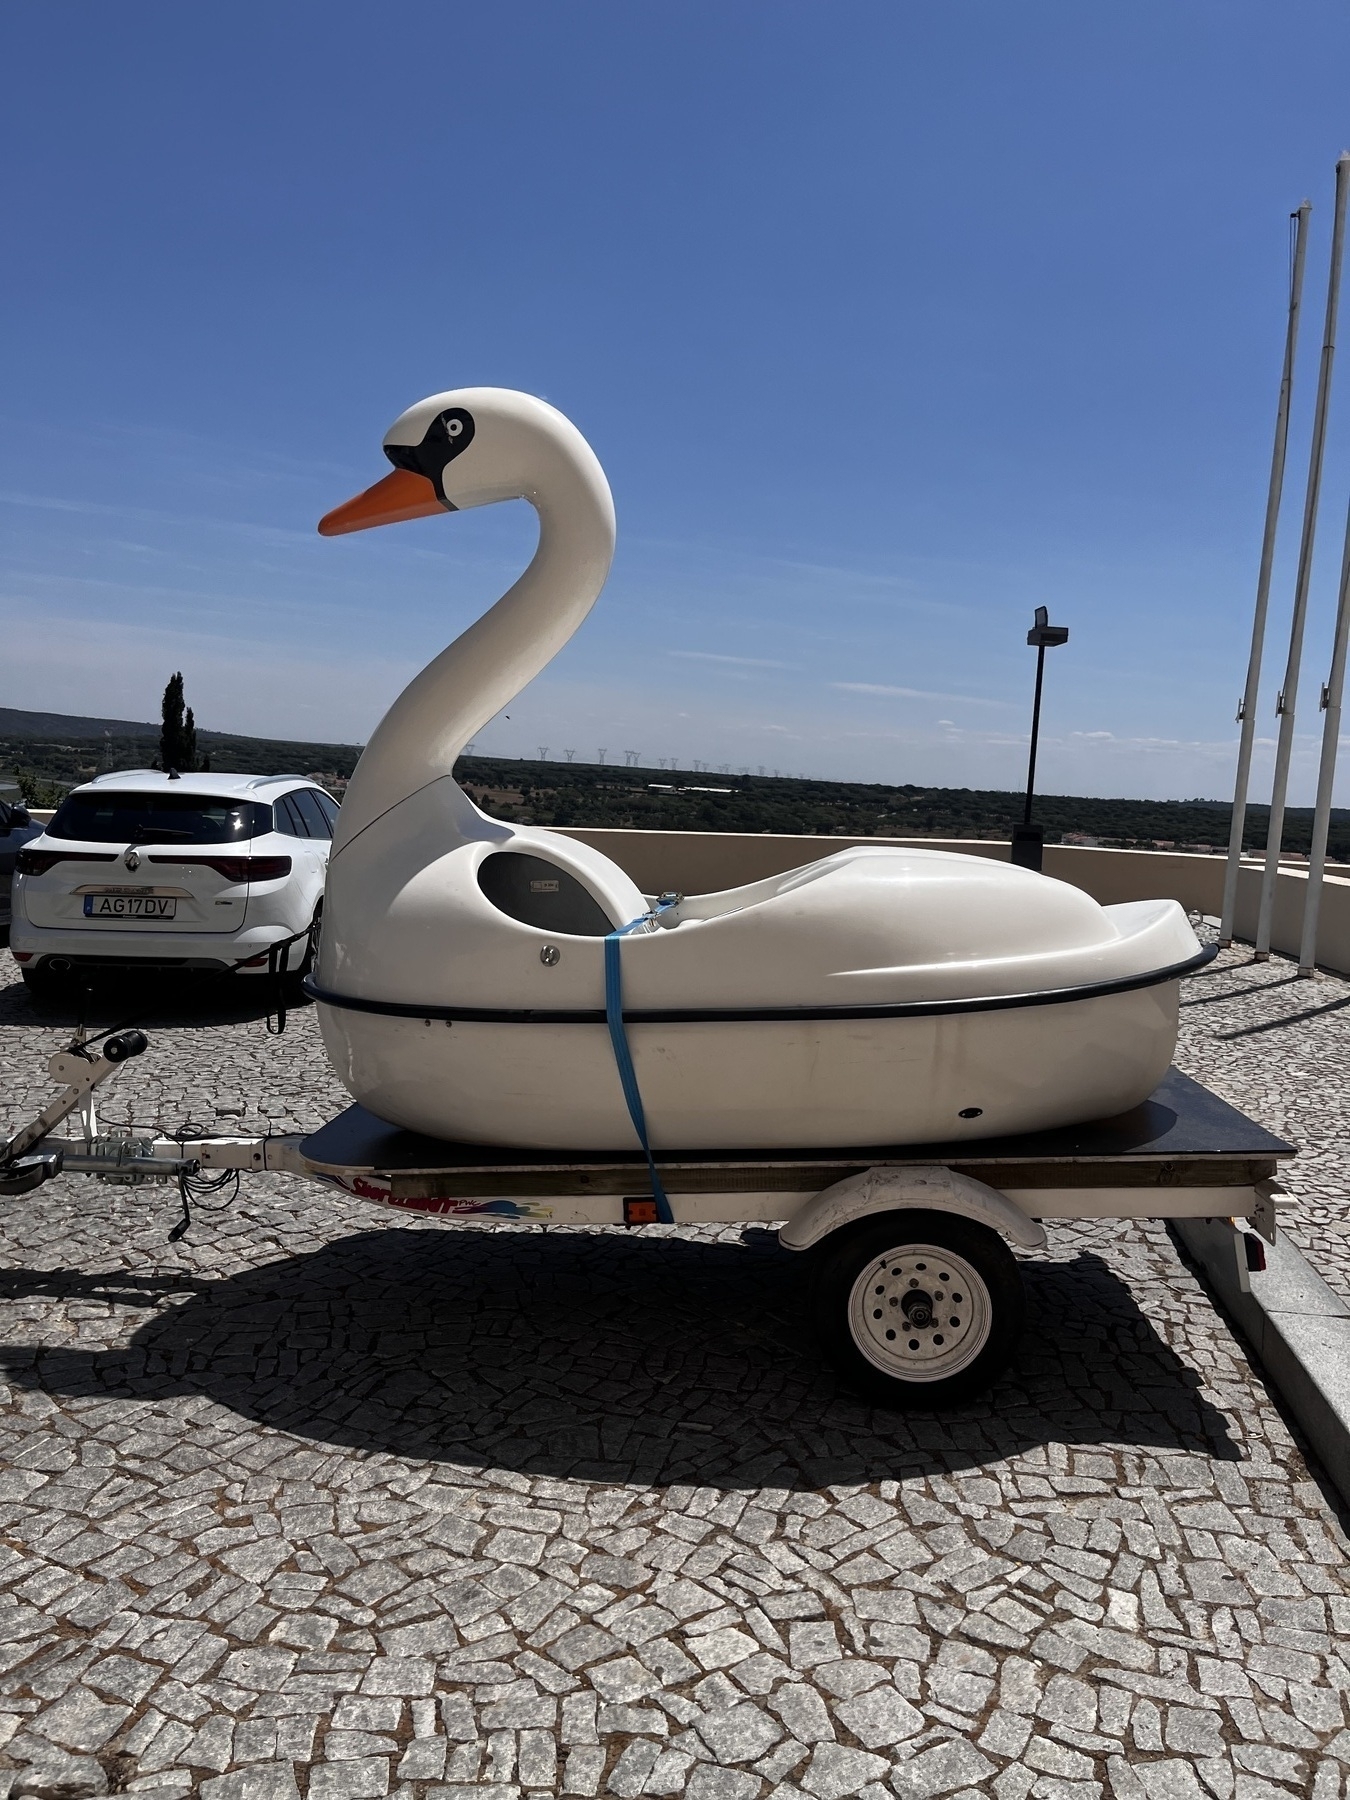 A large plastic model of a swan on a trailer.